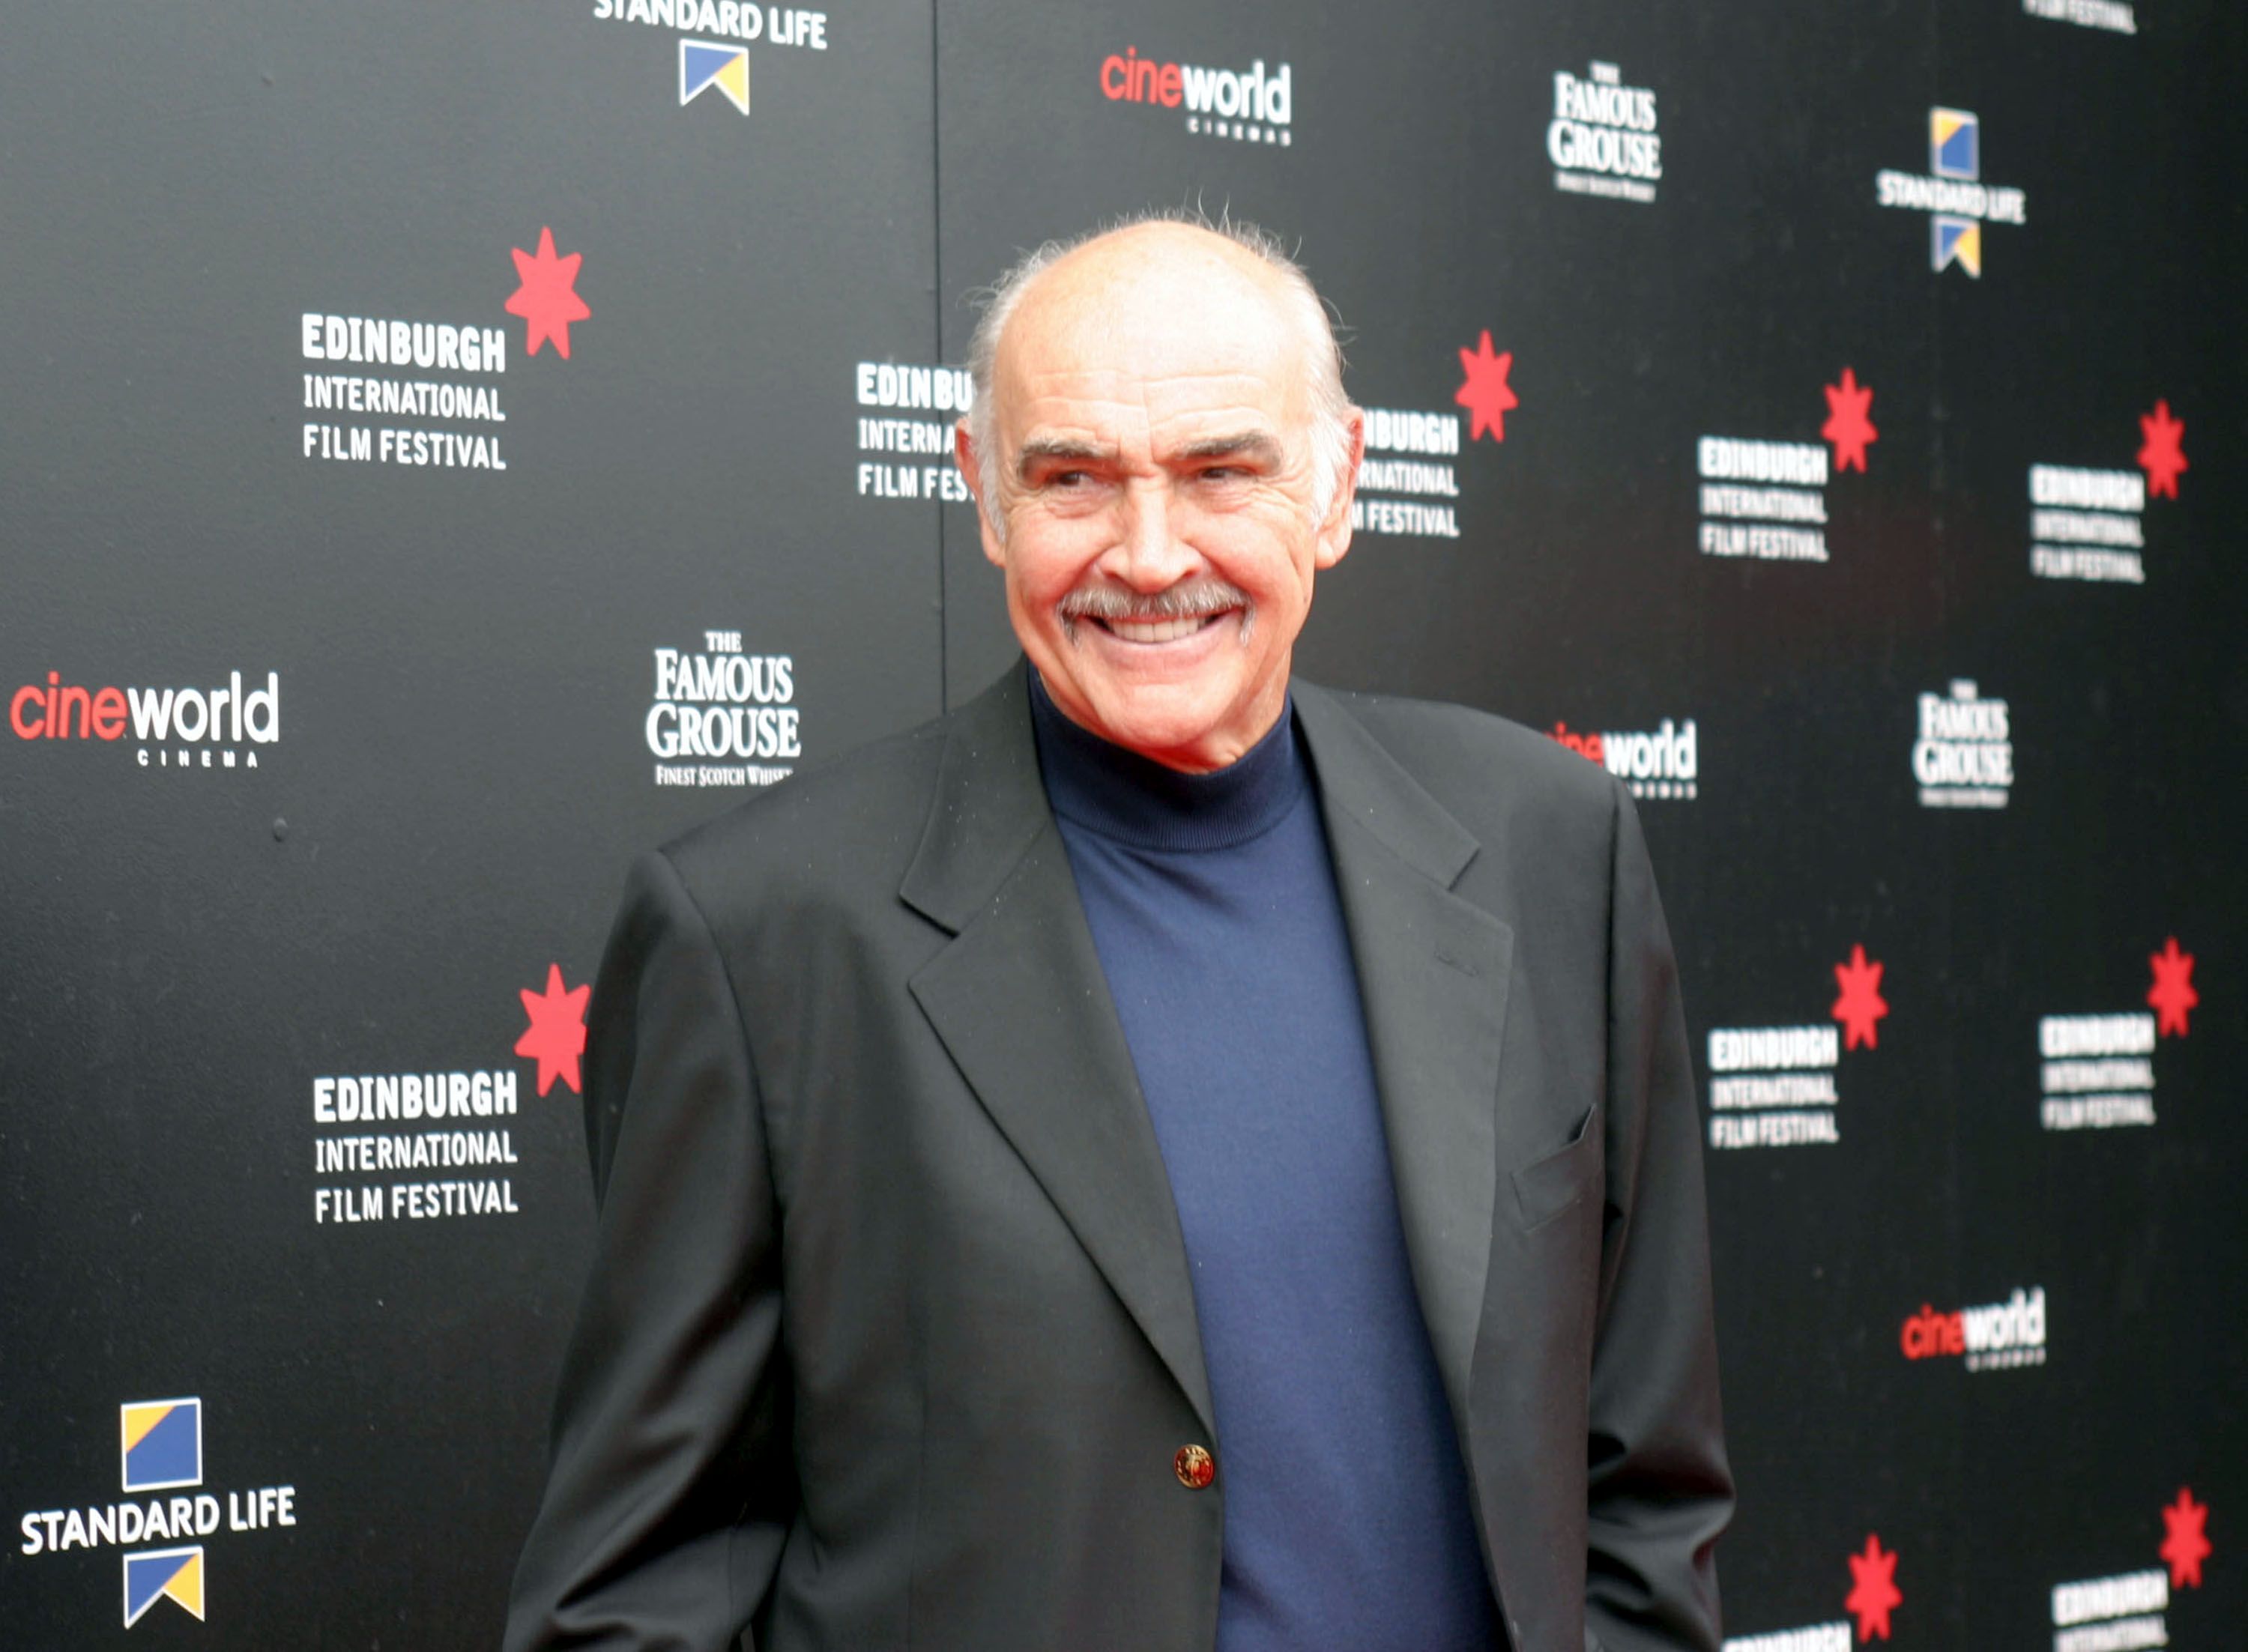 Sir Sean Connery at the Edinburgh International Film Festival at Cineworld on August 25, 2006 | Photo: Getty Images